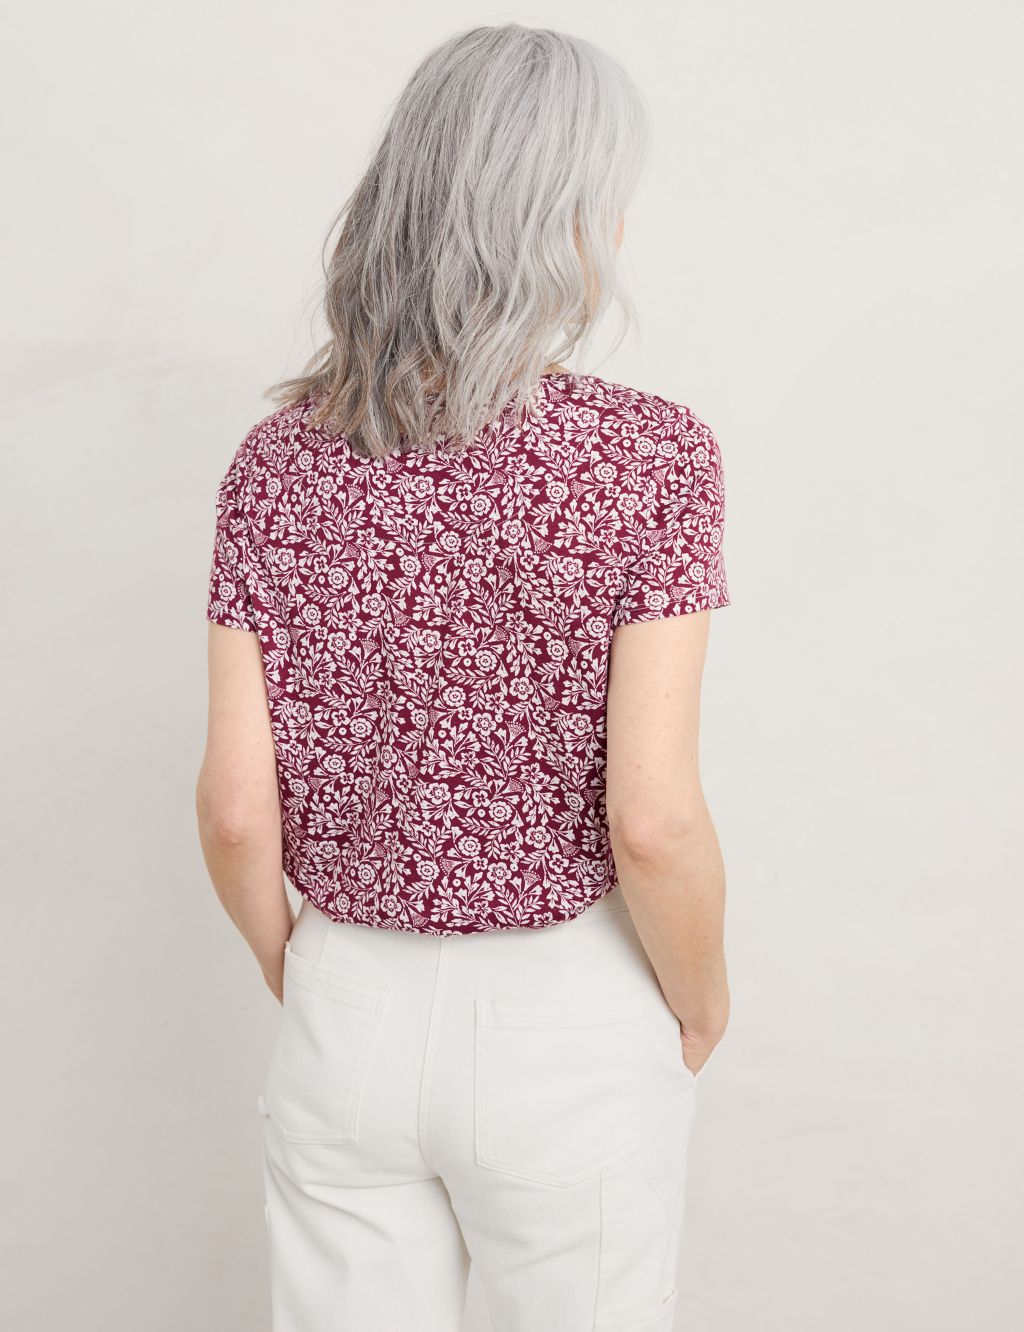 Cotton Blend Floral Relaxed Top image 3